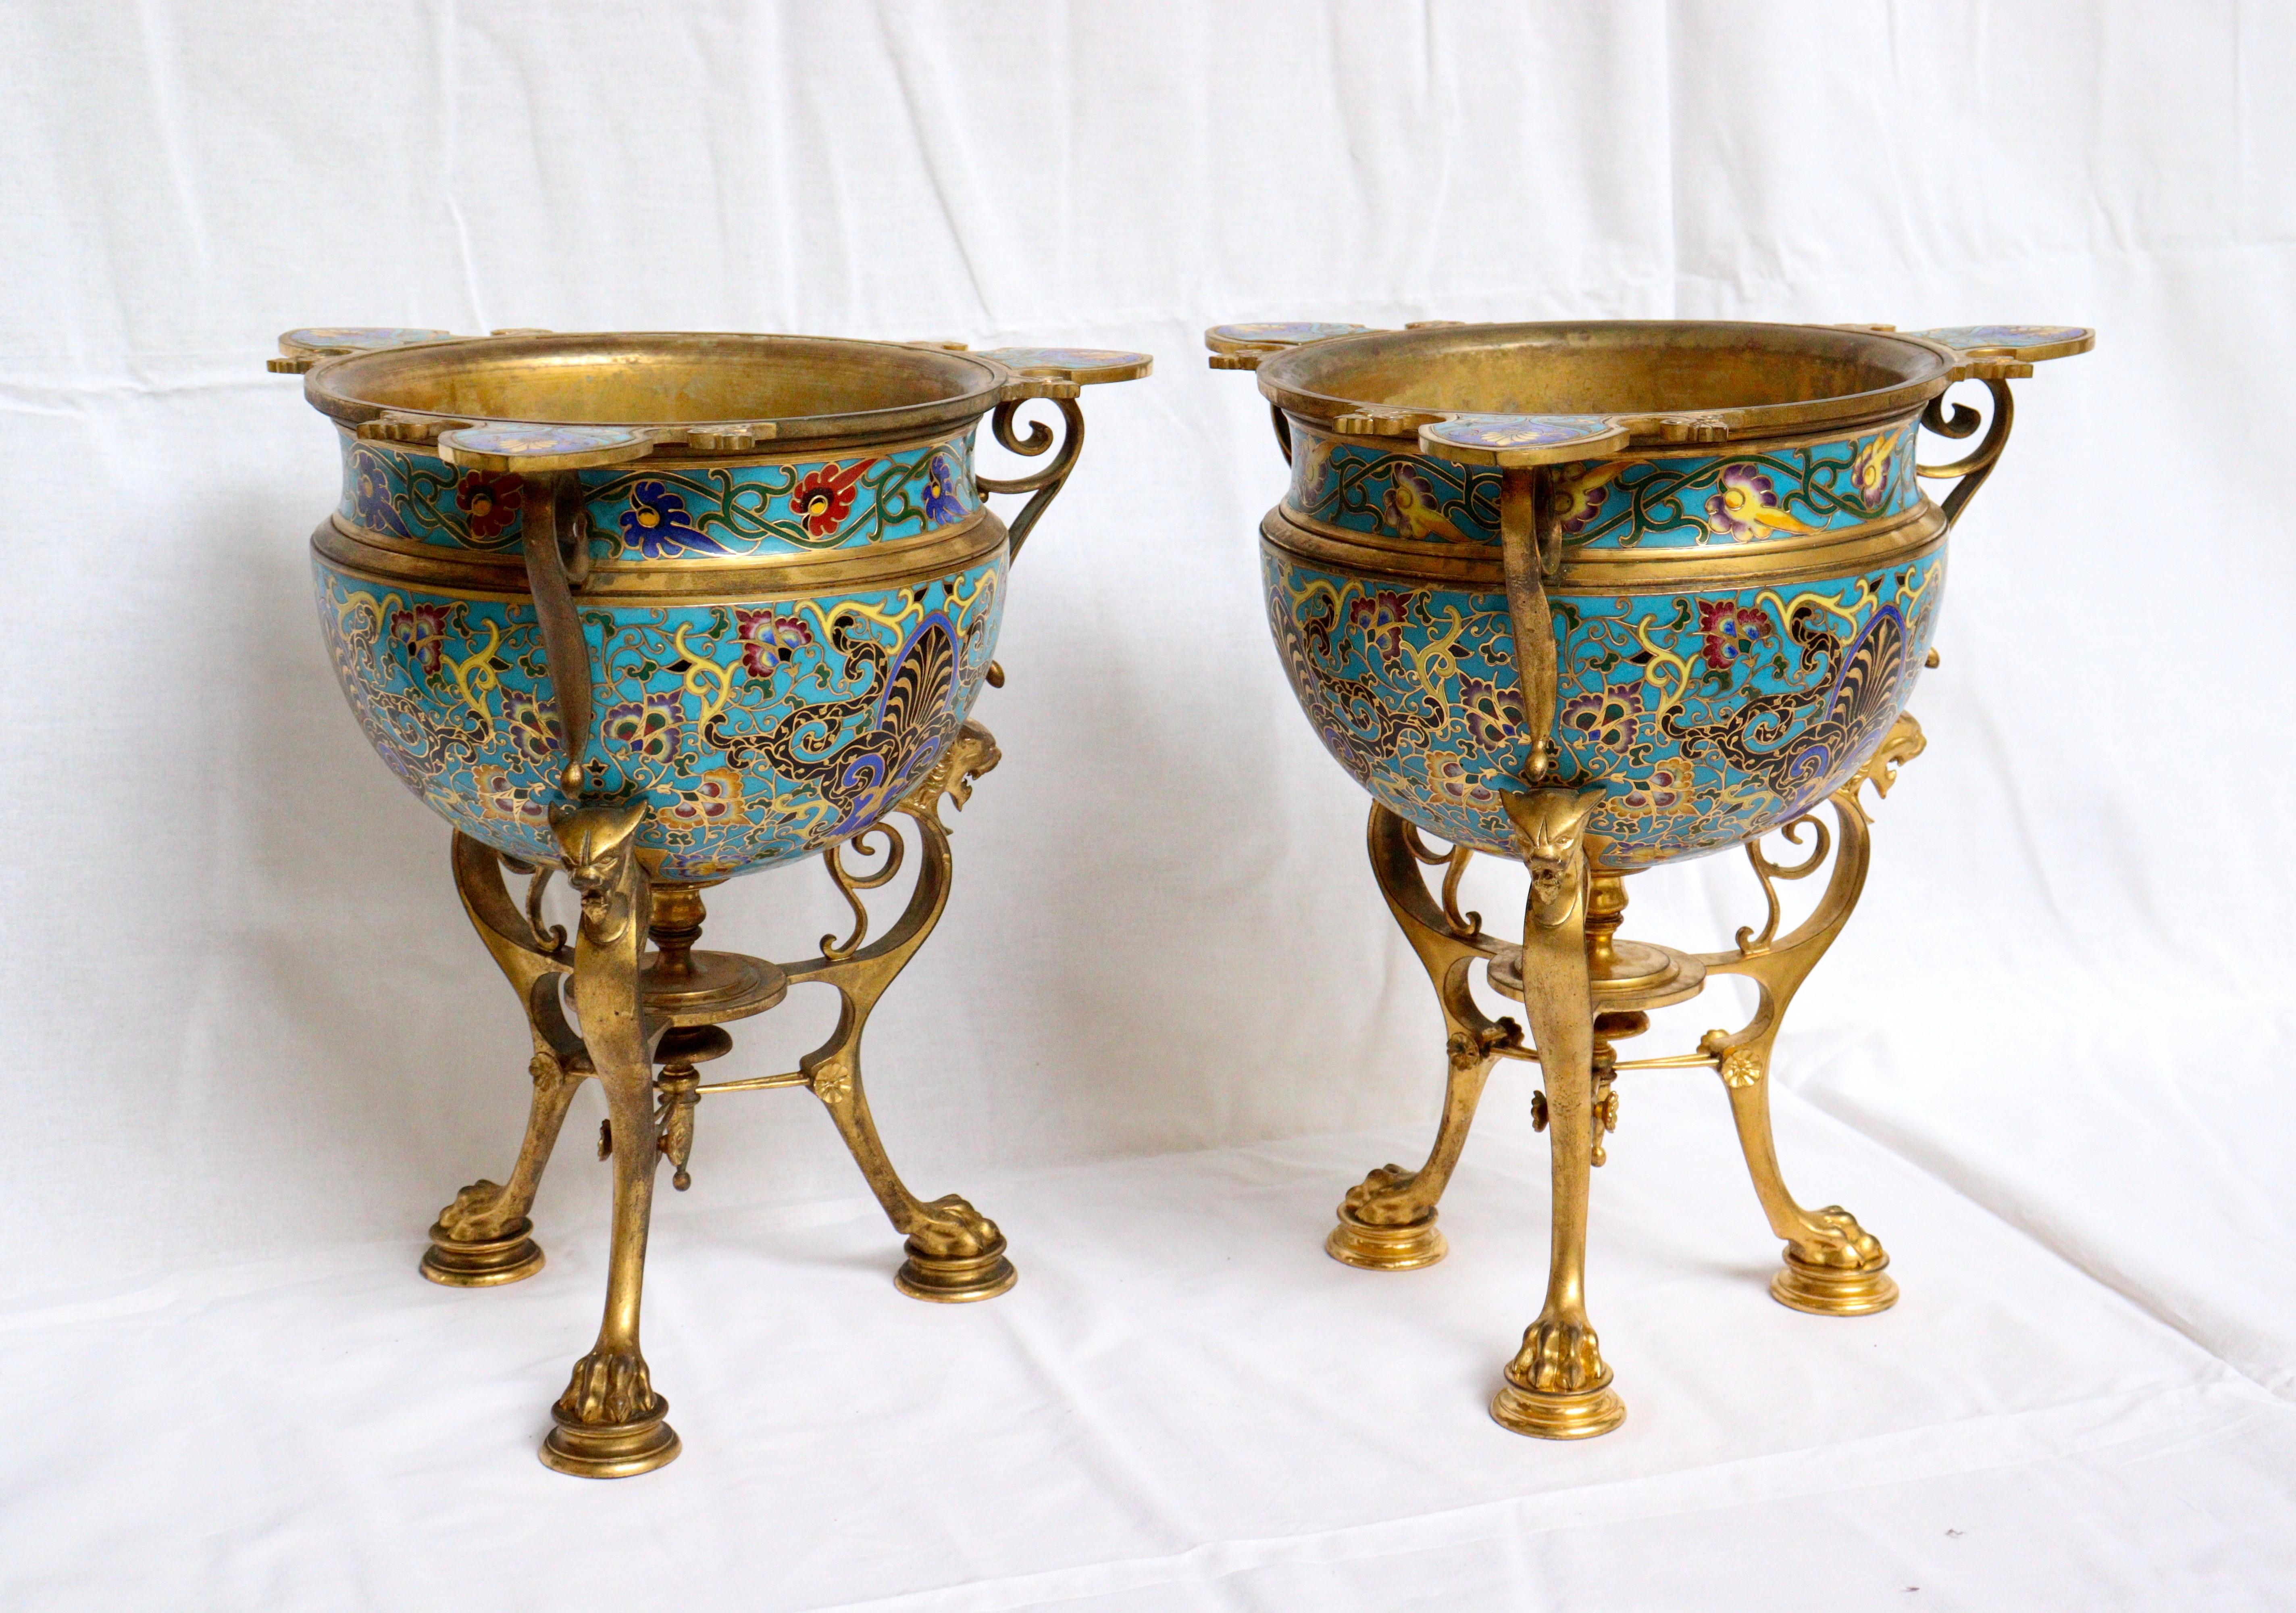 A 19th century French Ormolu and Cloisonne enamel pair of jardinieres “En Athéniennes” 
The central bowl with three scrolling handles and supported on a tripod stretchered base formed as three panther monopodia terminating in claw feet, the body